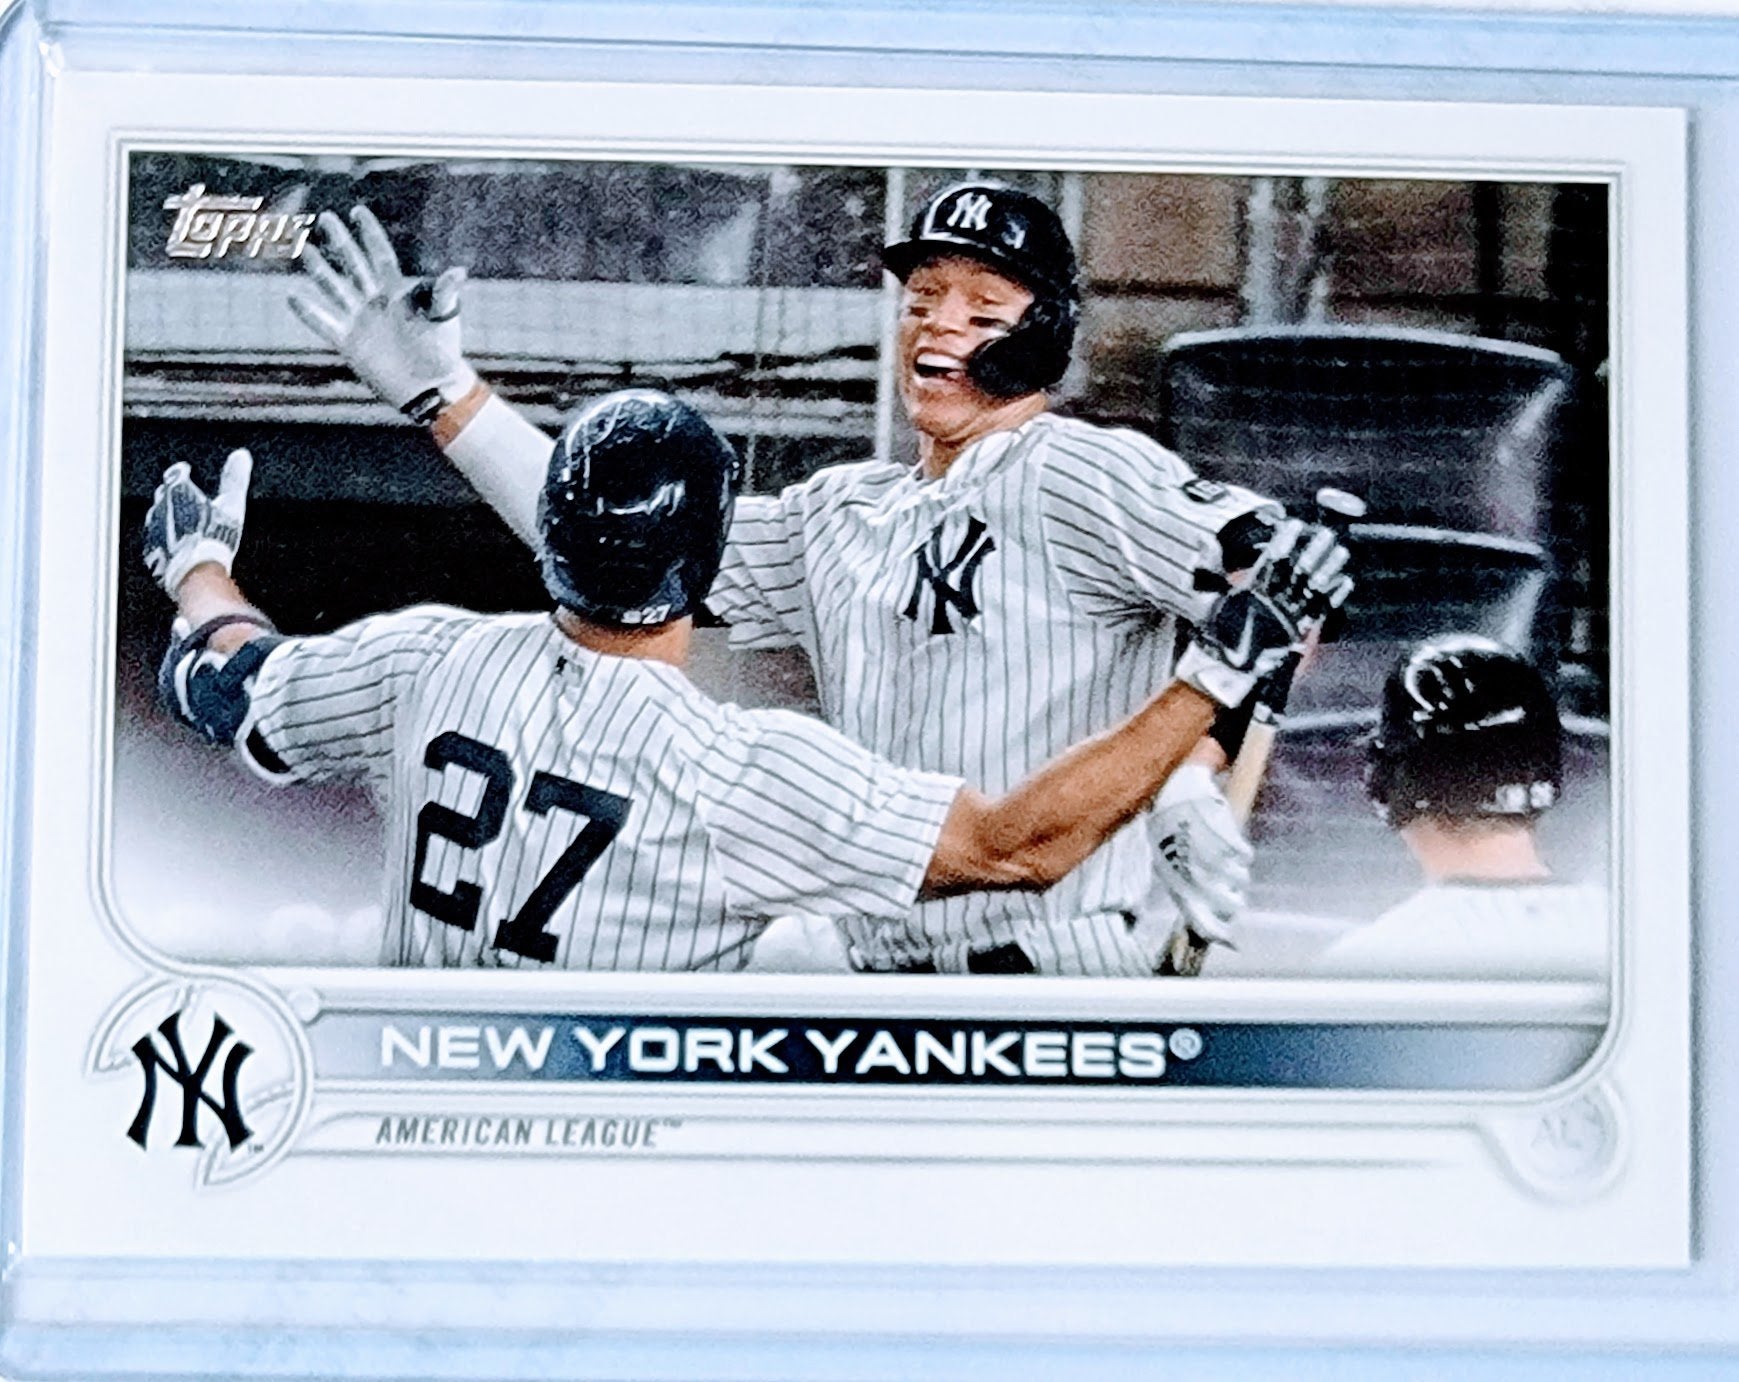 2022 Topps New York Yankees Team Baseball Trading Card GRB1 simple Xclusive Collectibles   